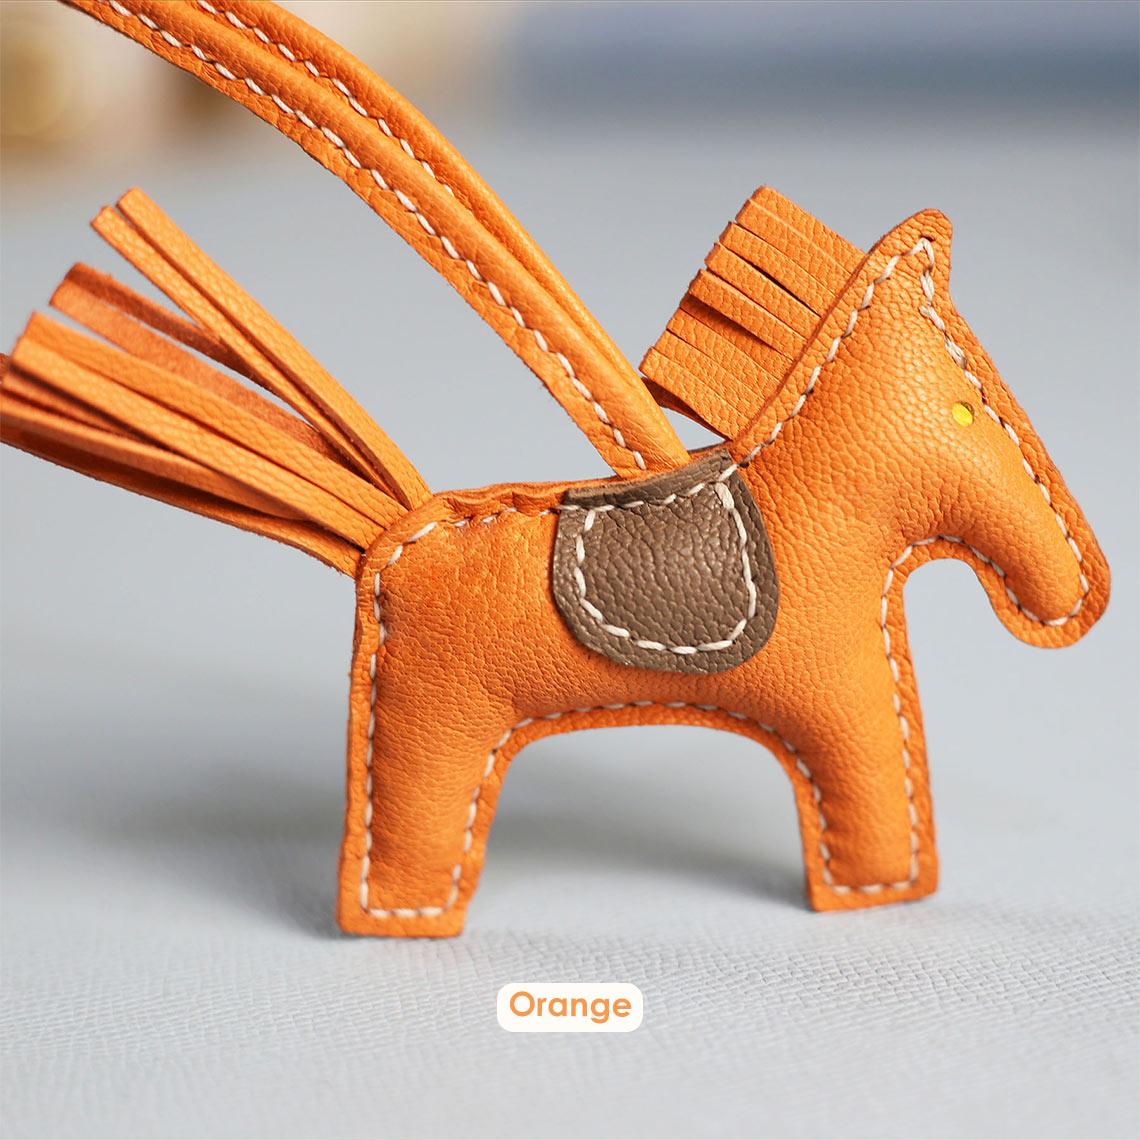 Orange Leather Rodeo Horse Bag Charm Keychain PM | Luxury Bag Accessories for Affordable Price - POPSEWING™